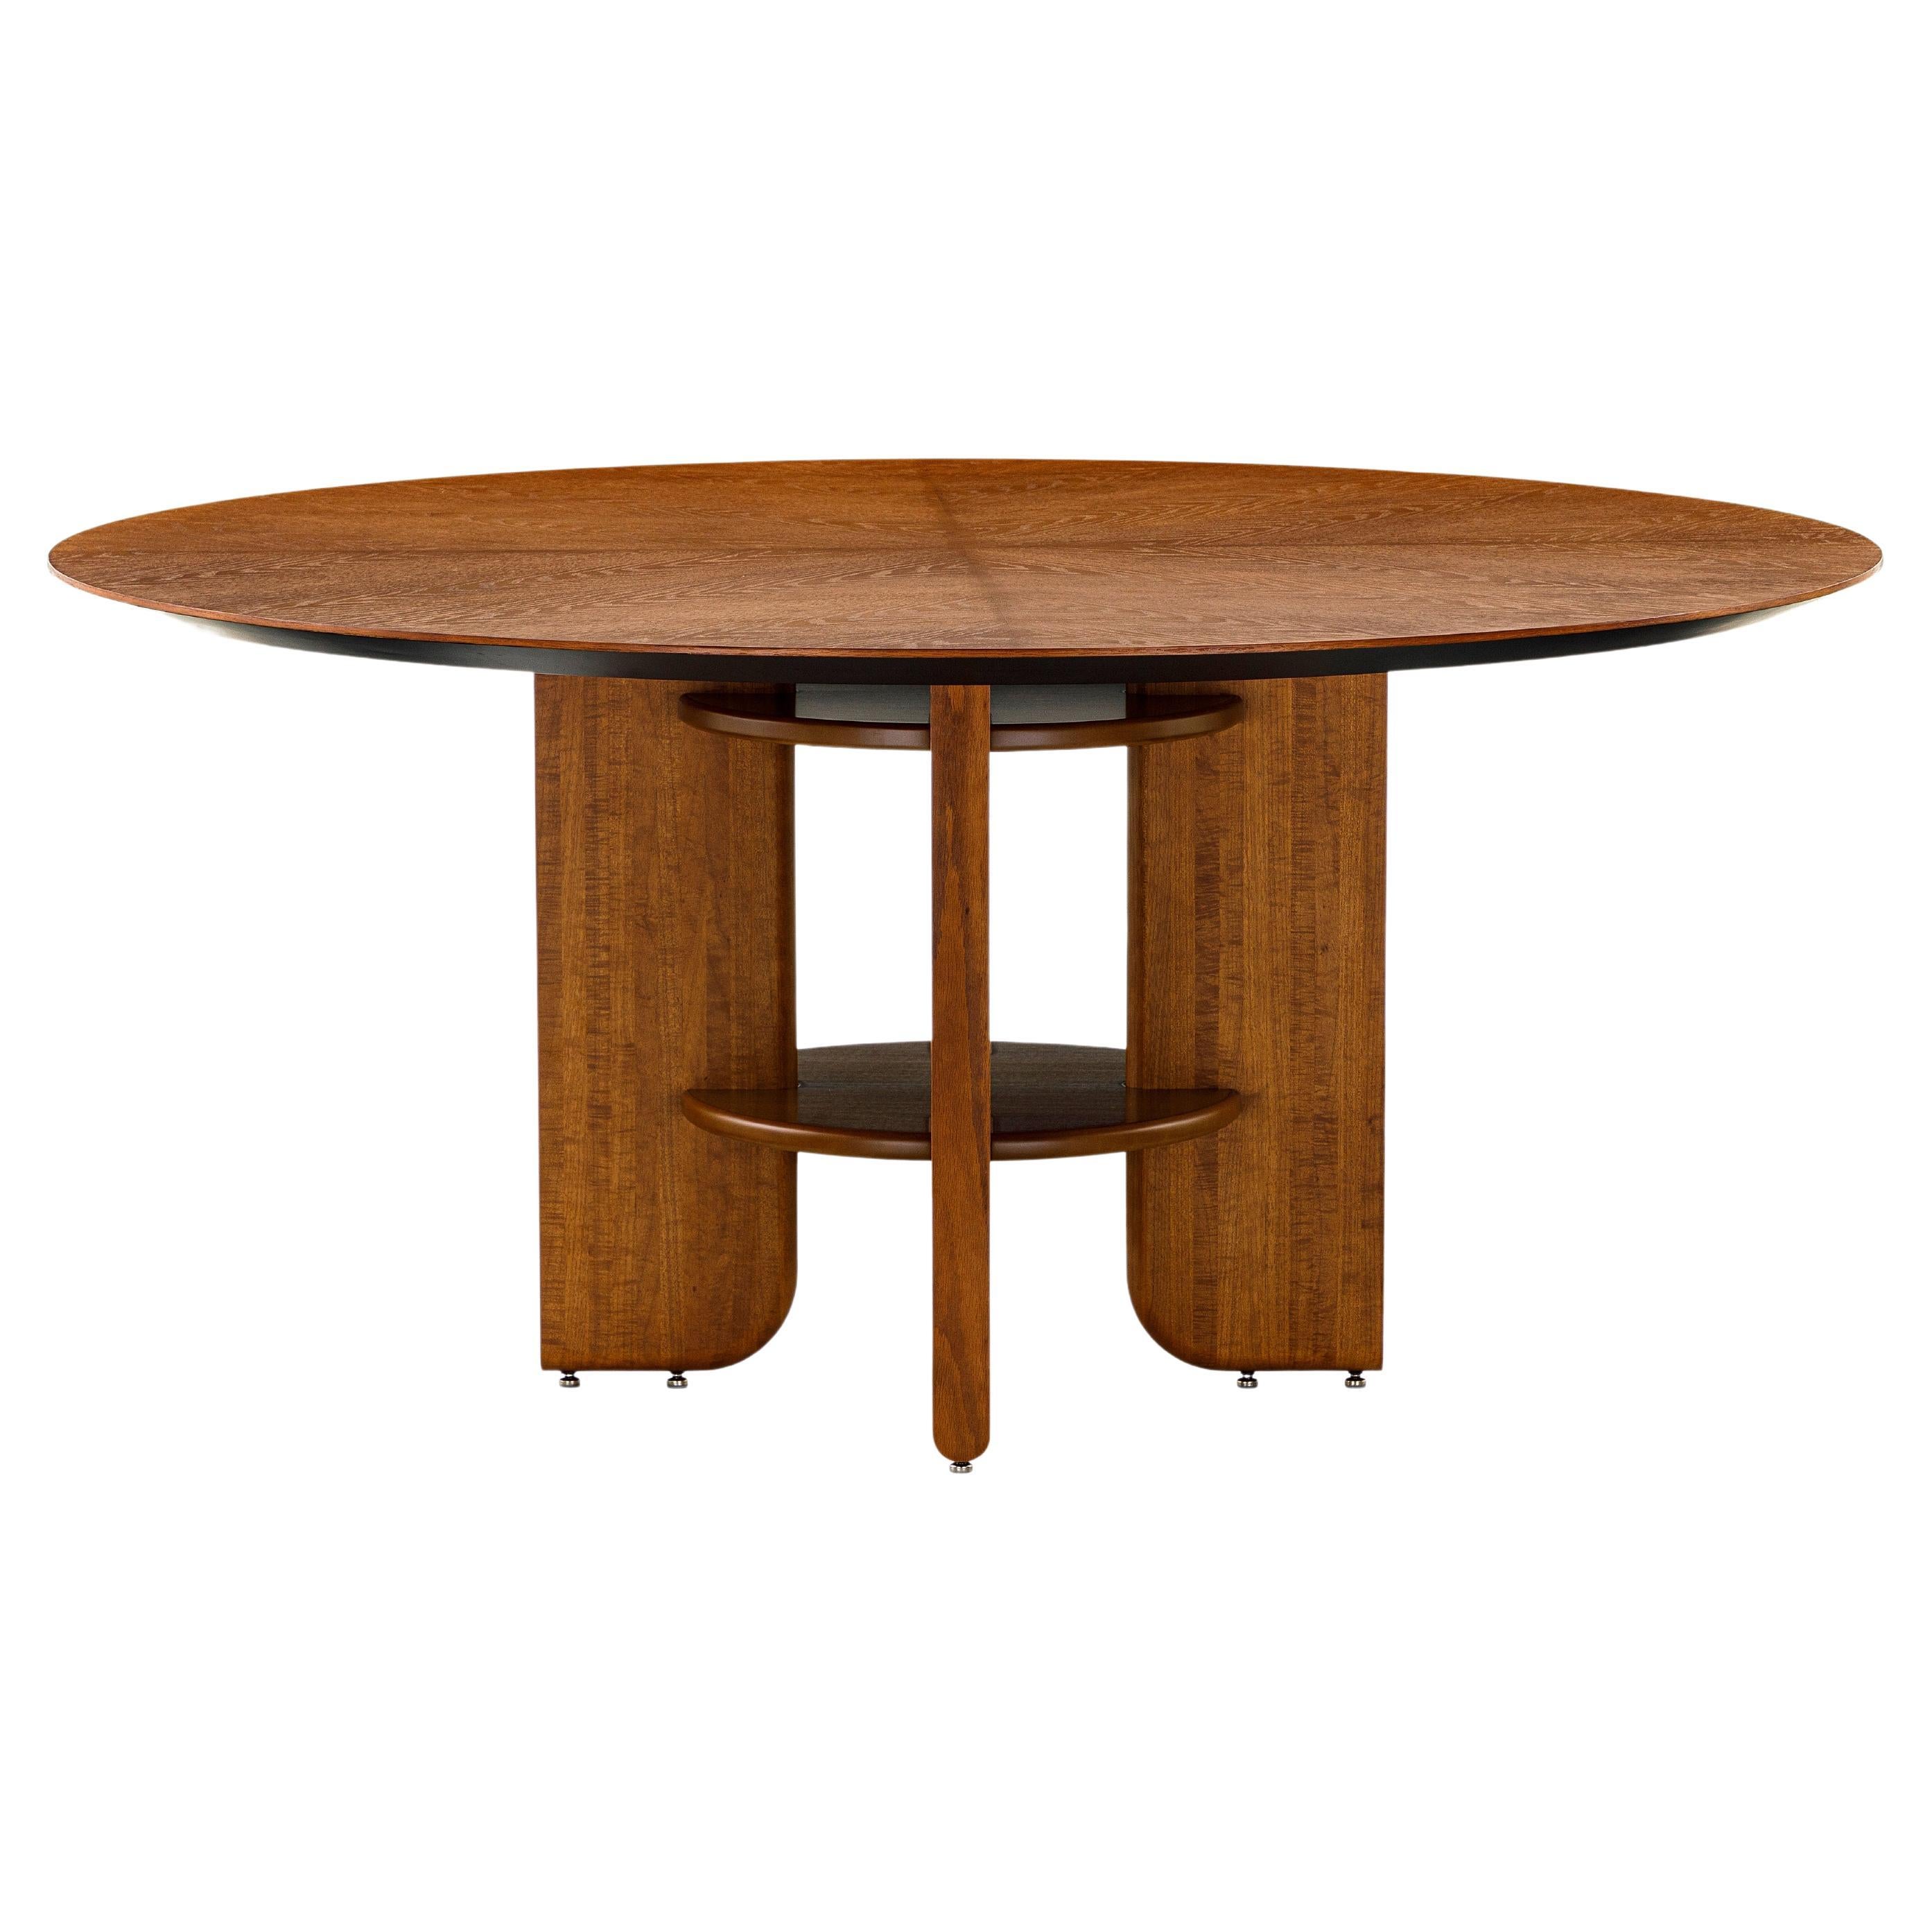 Moon Round Dining Table with Almond Oak Veneered Top and Wood Legs 63''